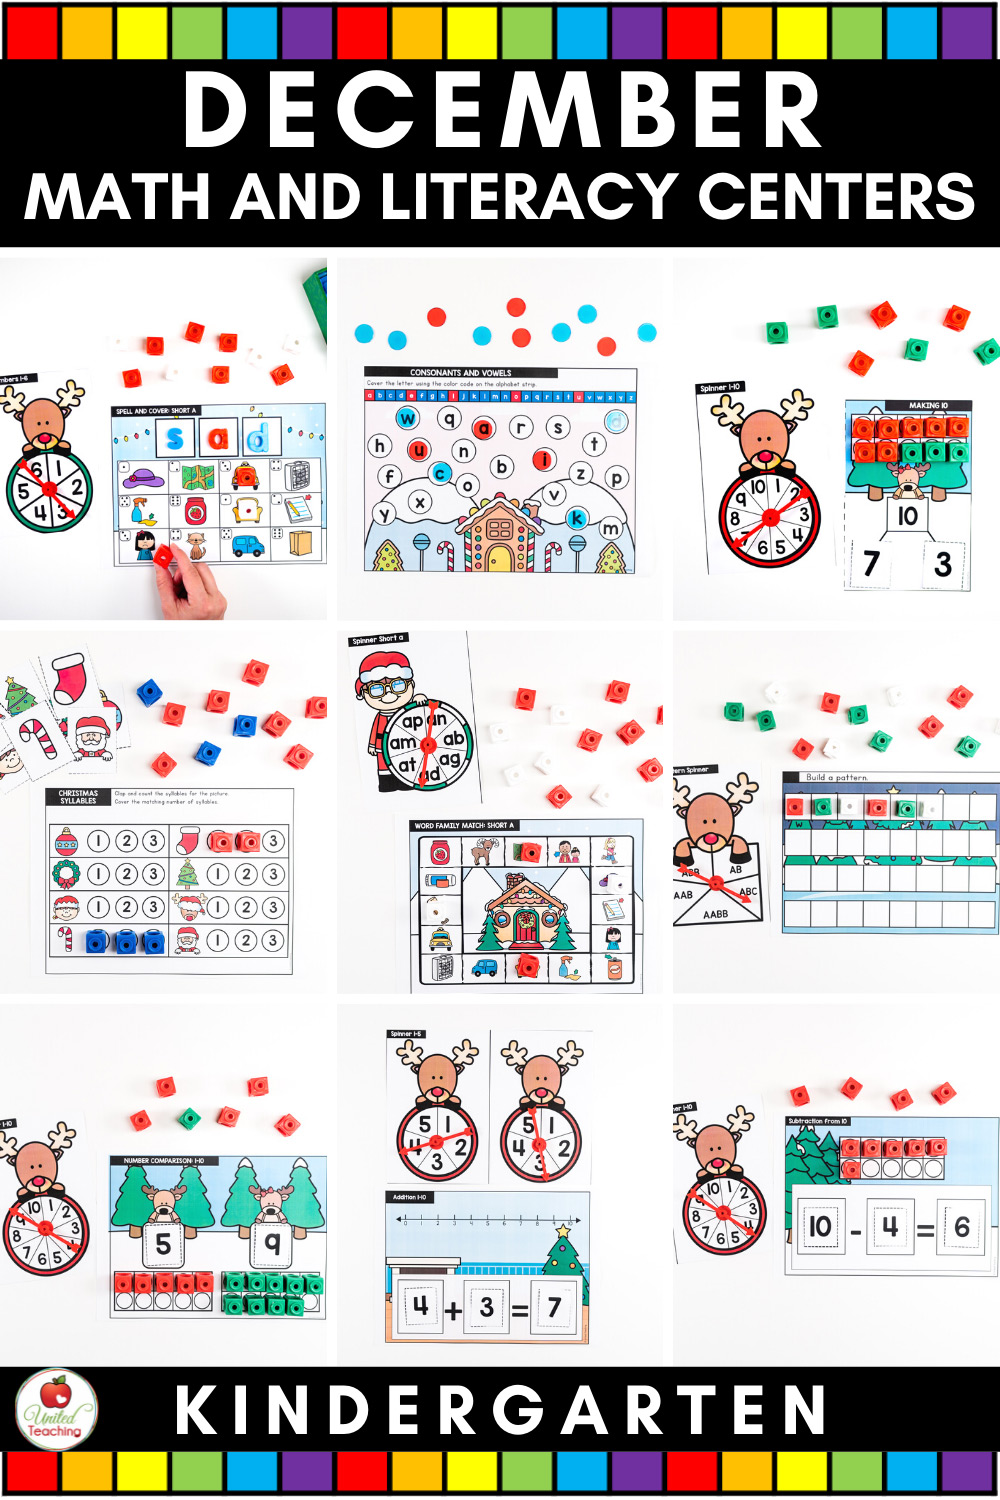 December Math and Literacy Centers for Kindergarten Pin Image